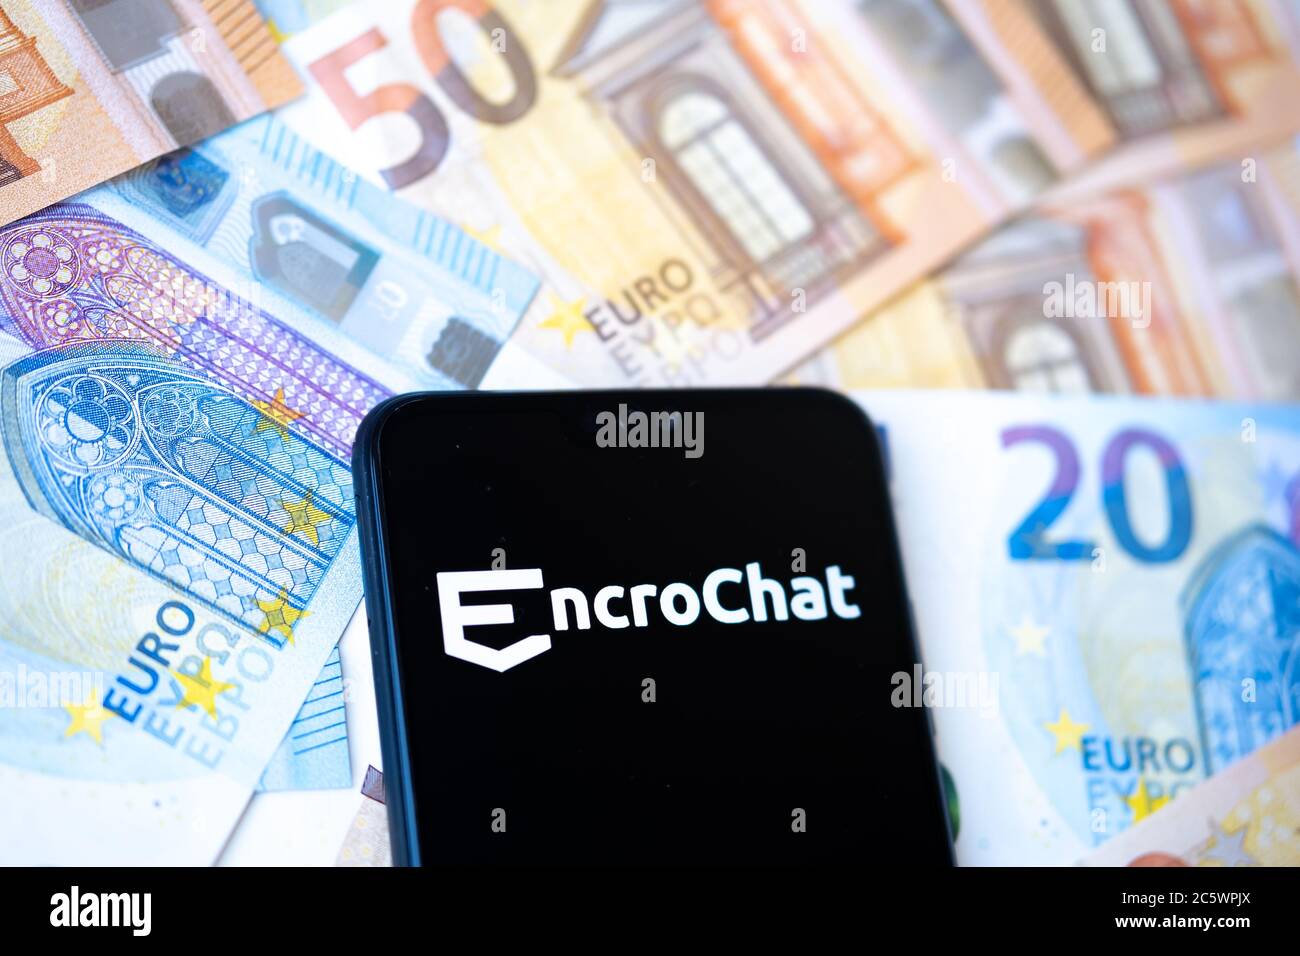 Stone / UK - July 5 2020: EncroChat logo on the smartphone and spread pile of Euros. Selective focus. Stock Photo